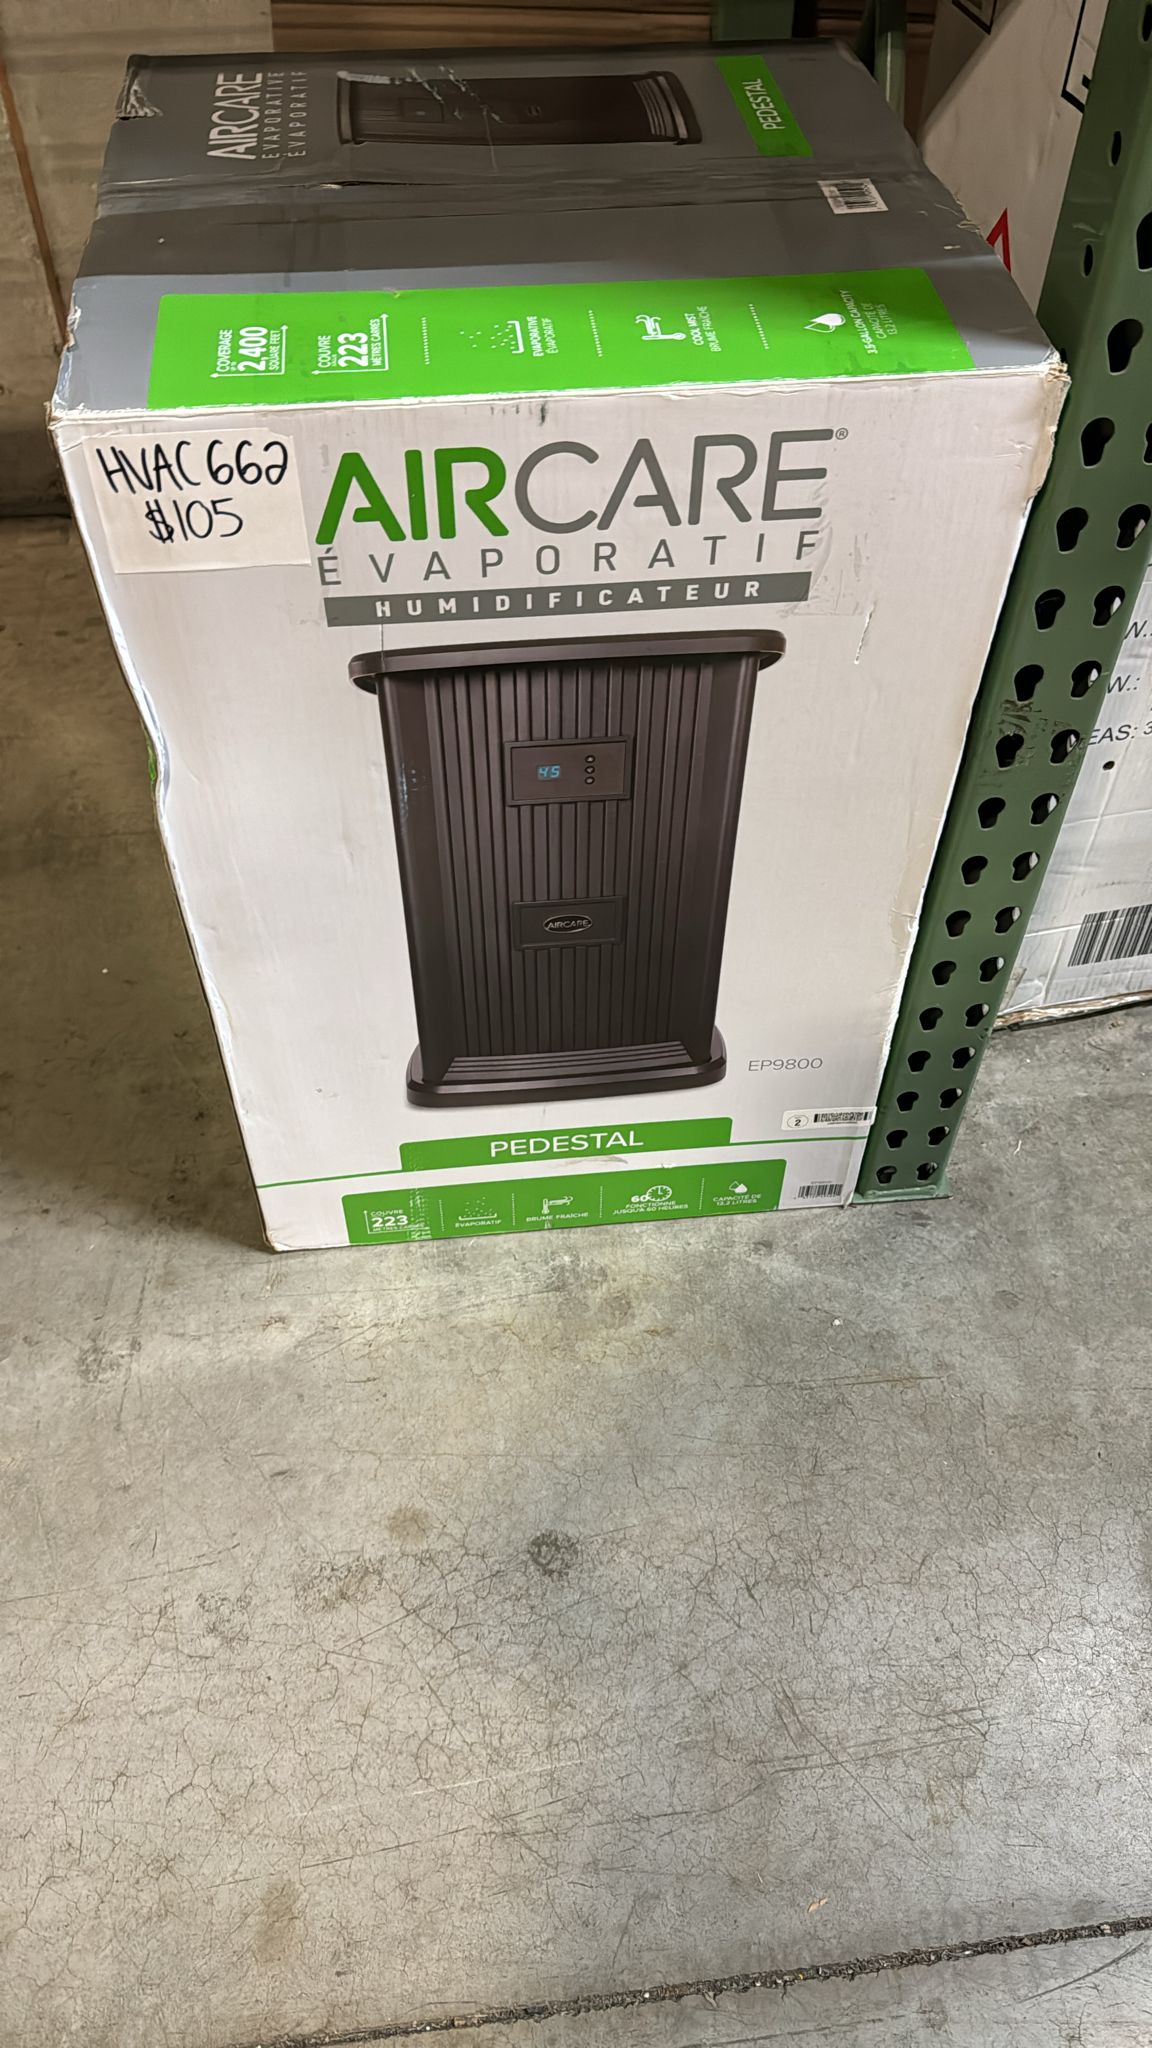 AIRCARE Pedestal 3.5-Gallons Tower Evaporative Humidifier (Rooms Up To 2400-sq ft) - $105